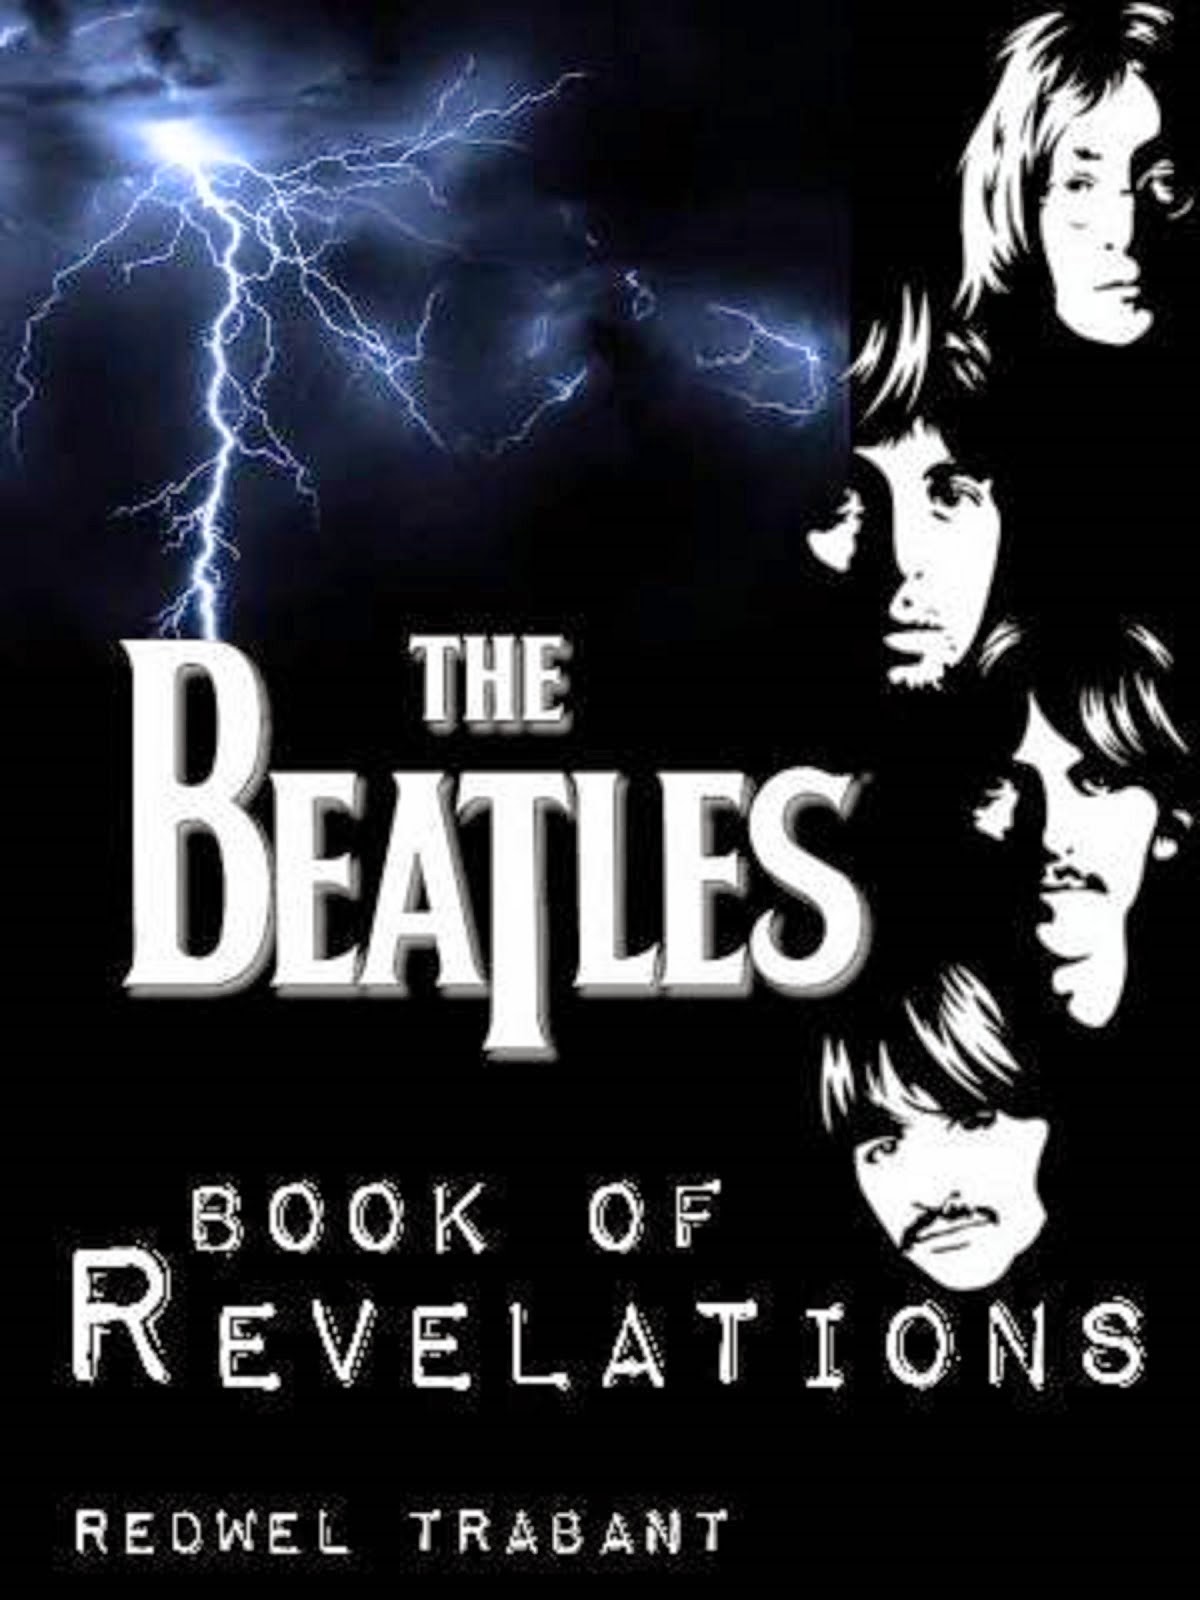 THE BEATLES BOOK OF REVELATION